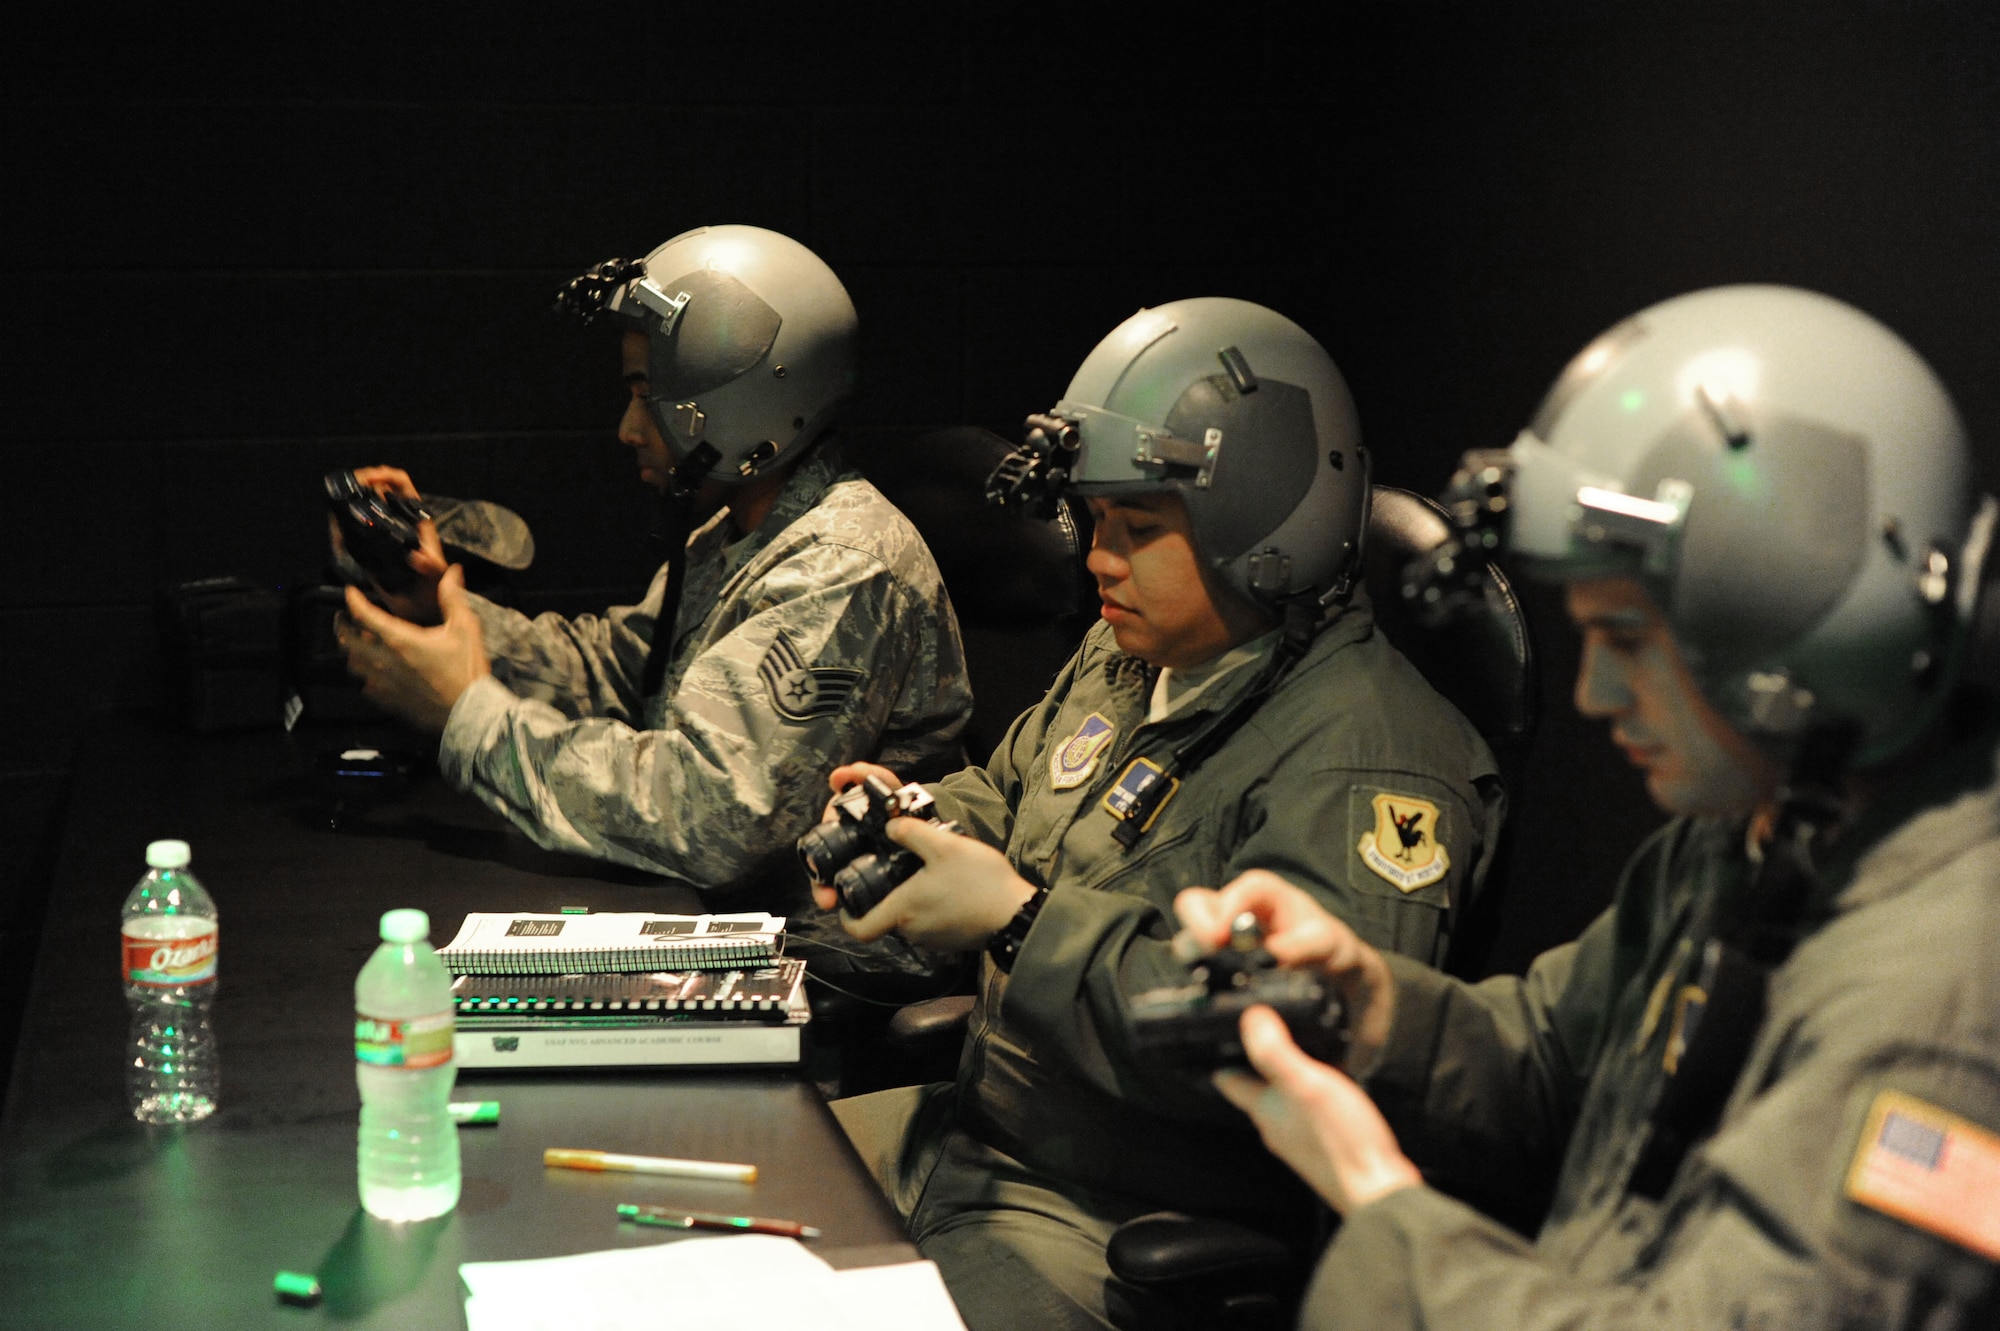 (From left) Staff Sgt. Sadek Brandford, 27th Special Operations Support Squadron aerospace physiology technician, Staff Sgt. Nazareth Oliver, 18th Aerospace Medicine Squadron and Senior Airman Clint Copeland, 18th Aerospace Medicine Squadron, learn to attach night vision goggles to their helmet during a NVG Academic Instructors Course held at the Aerospace Physiology building on Joint Base San Antonio-Randolph Jan. 25. (U.S. Air Force photo/Rich McFadden) (released)